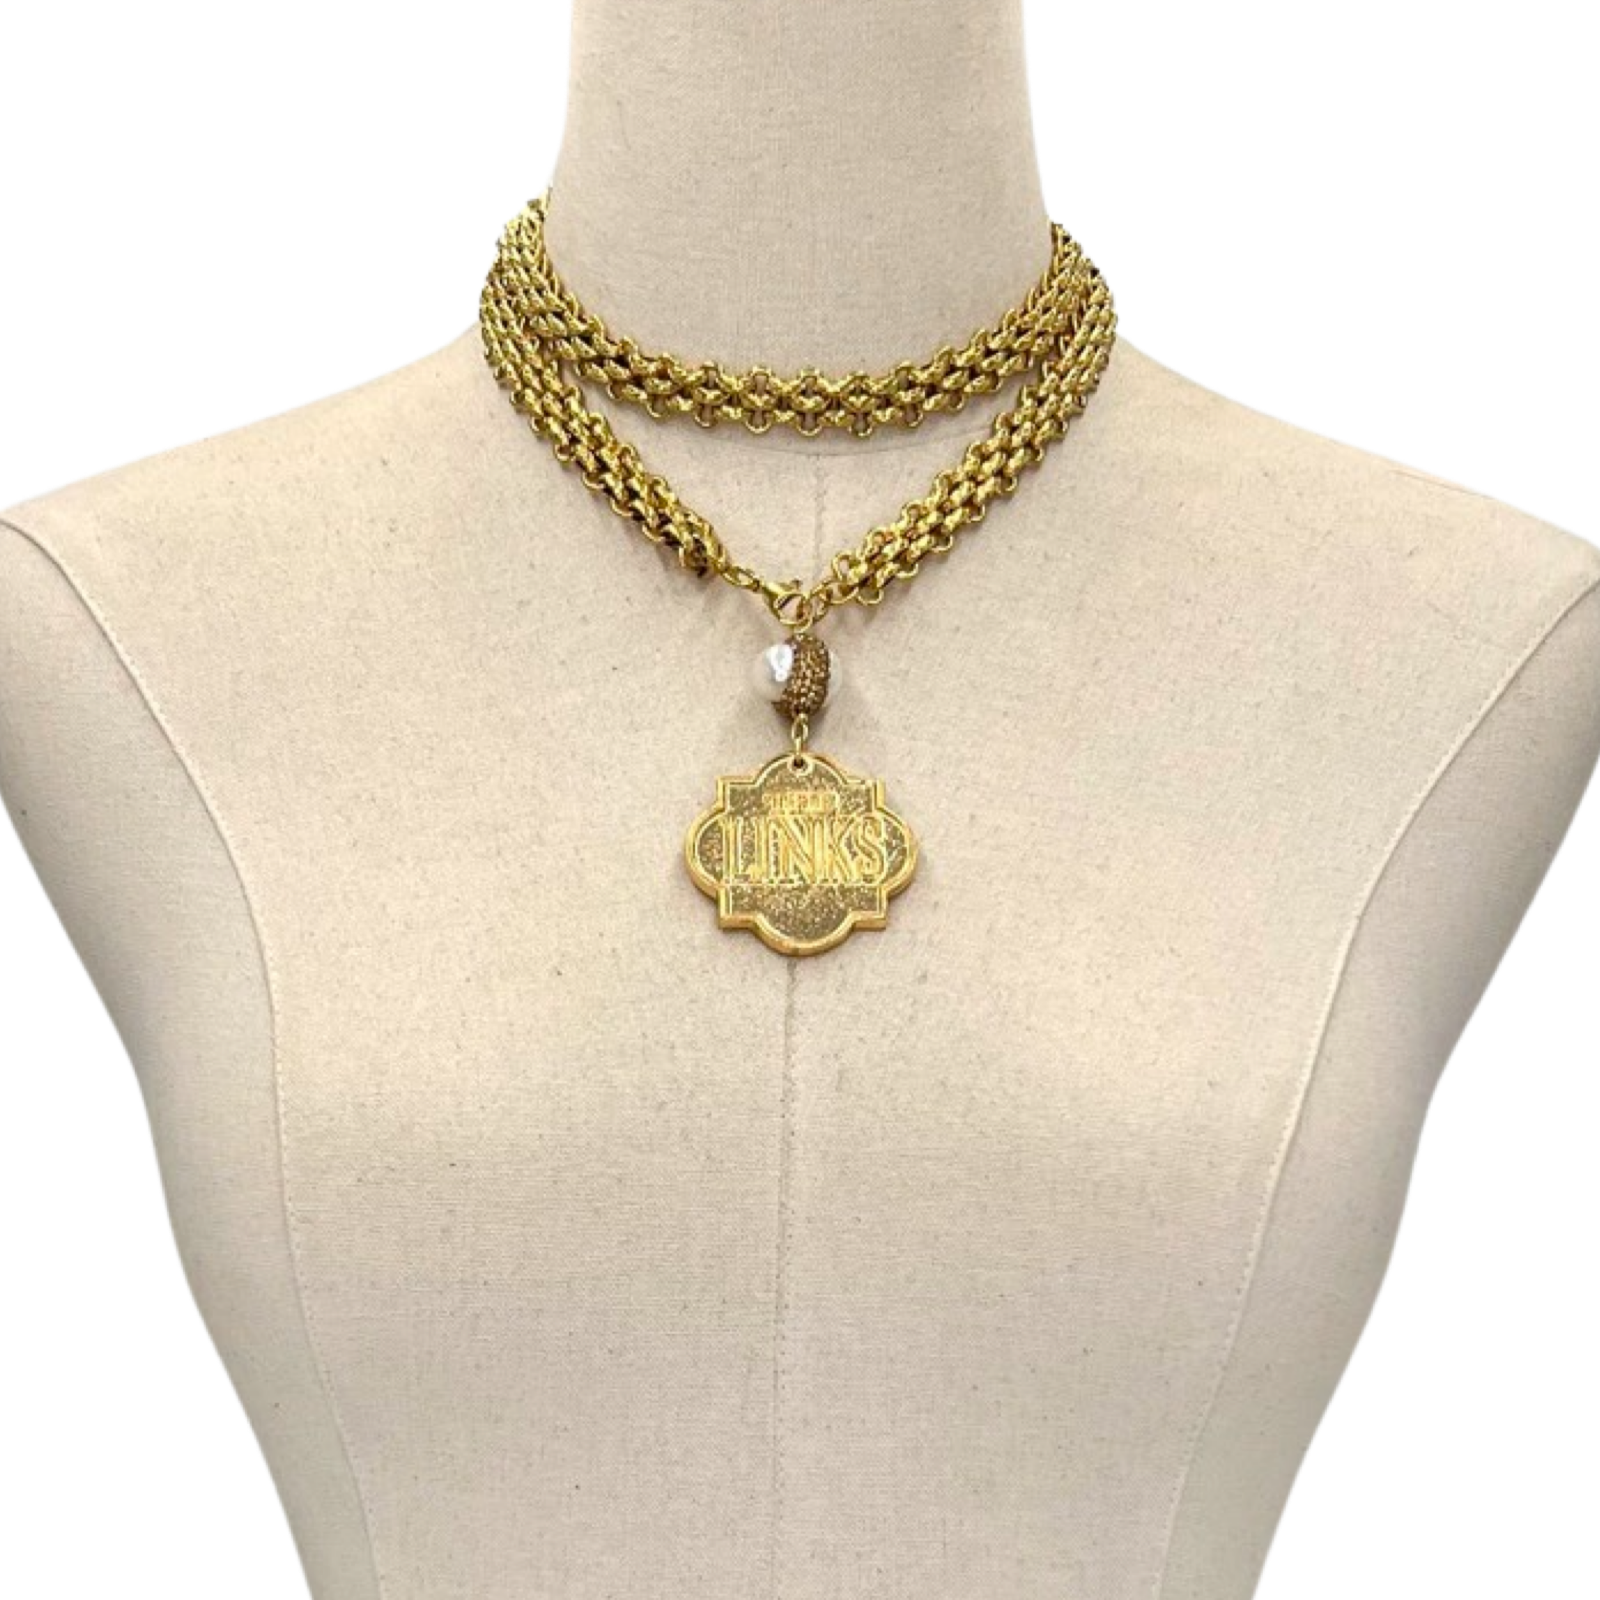 Links Vitri Chain Necklace